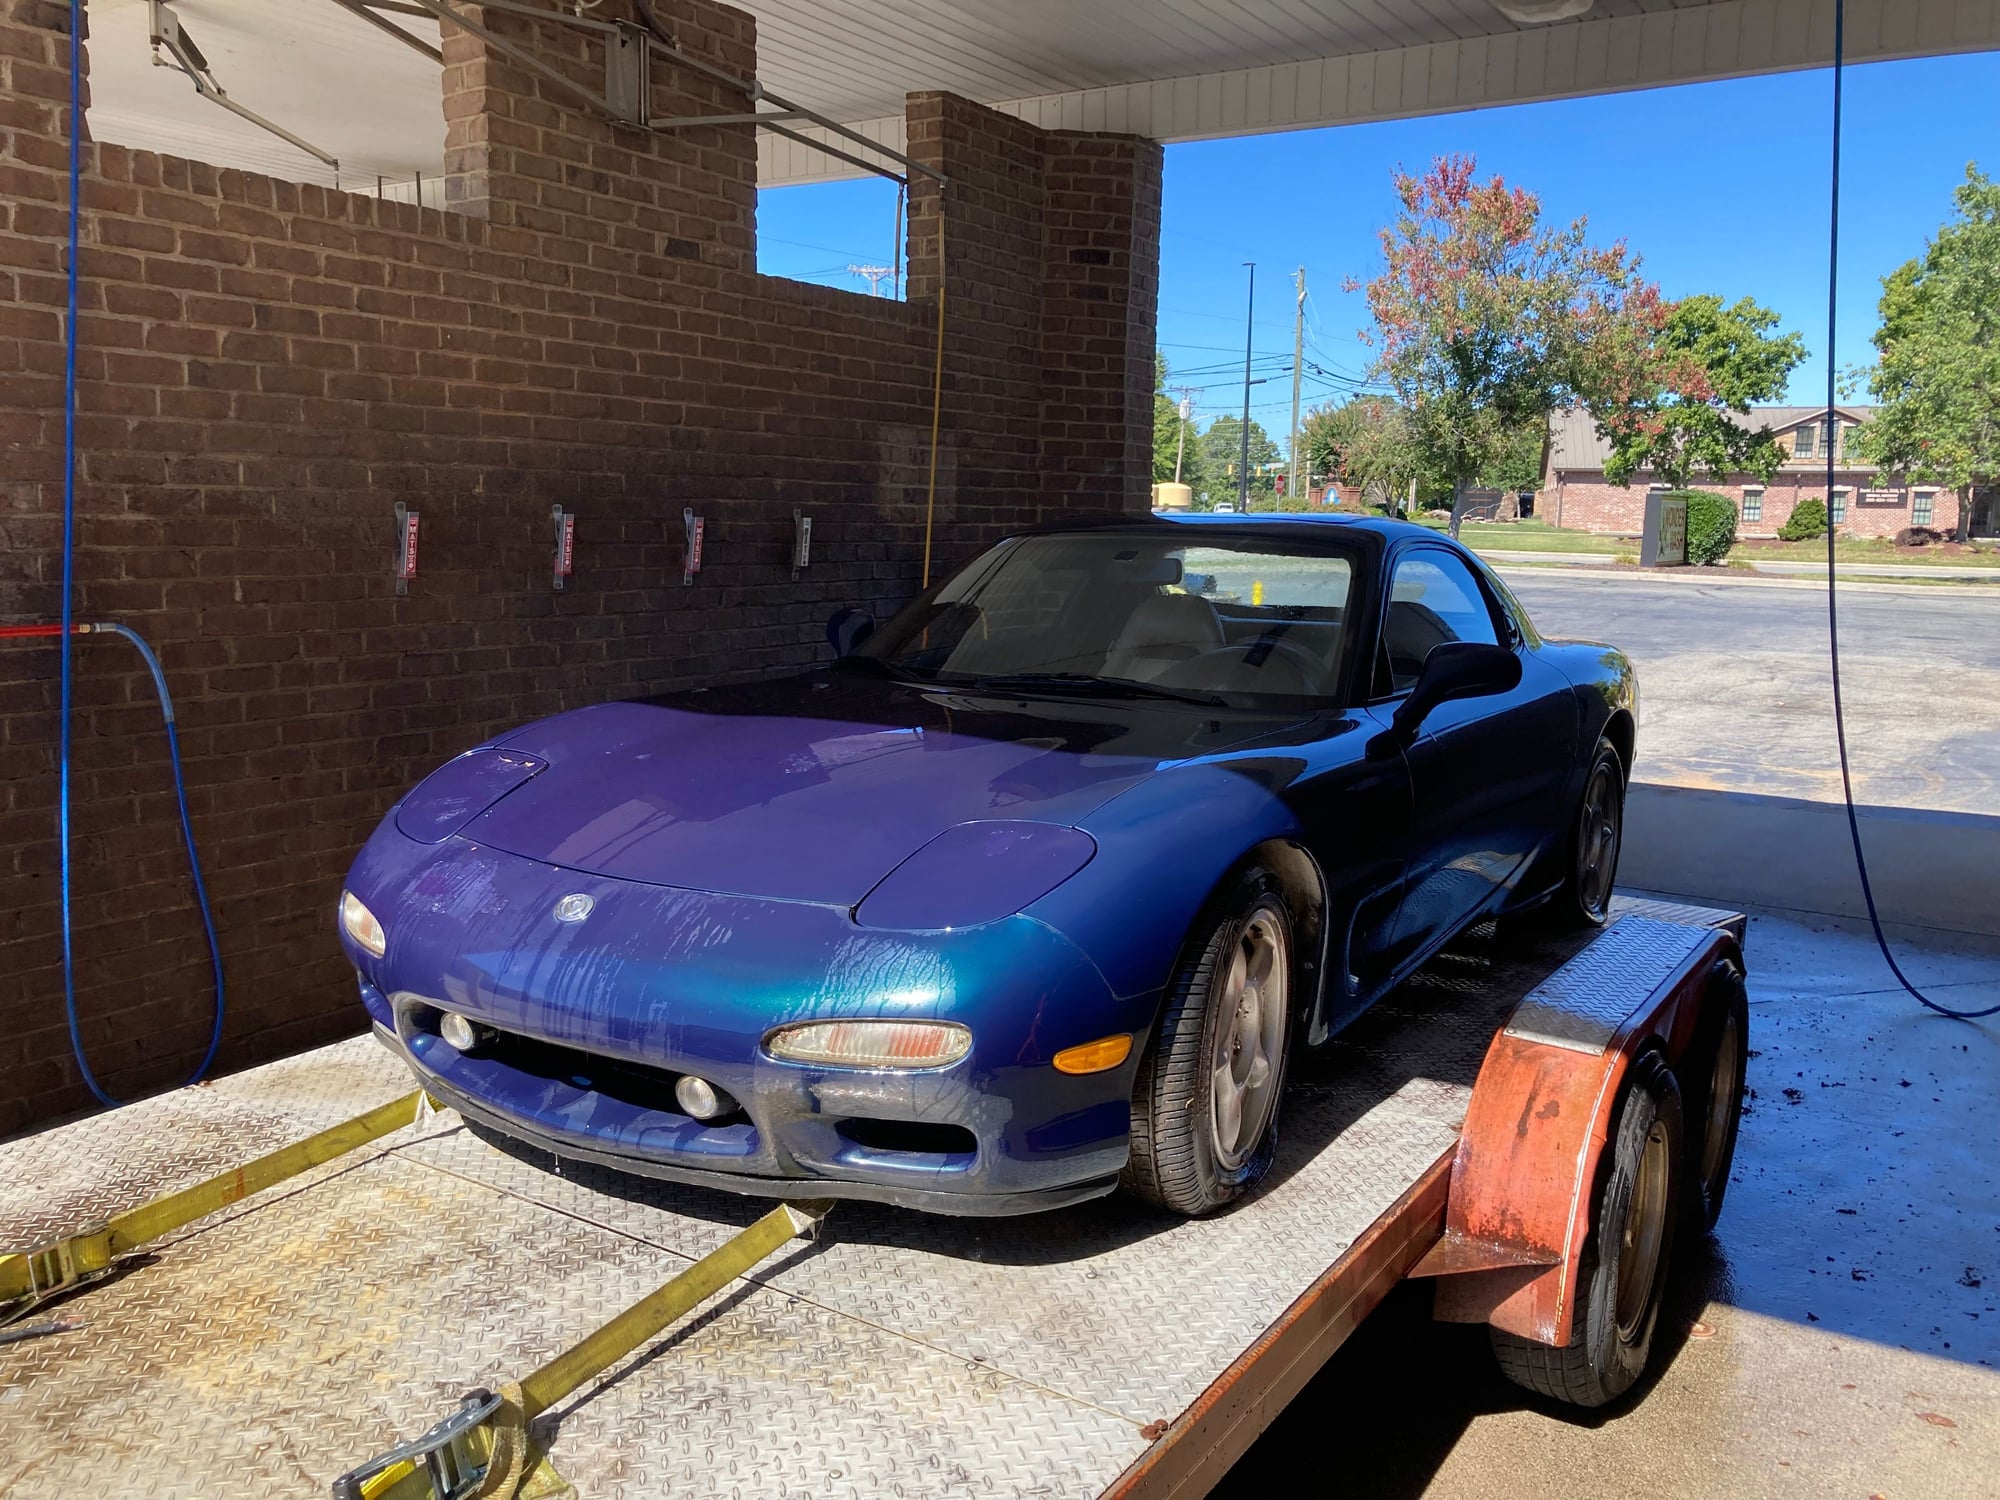 1994 Mazda RX-7 - 1994 MB Bone Stock - Used - VIN JM1FD3330R0303461 - 75,000 Miles - Other - Manual - Other - High Point, NC 27265, United States